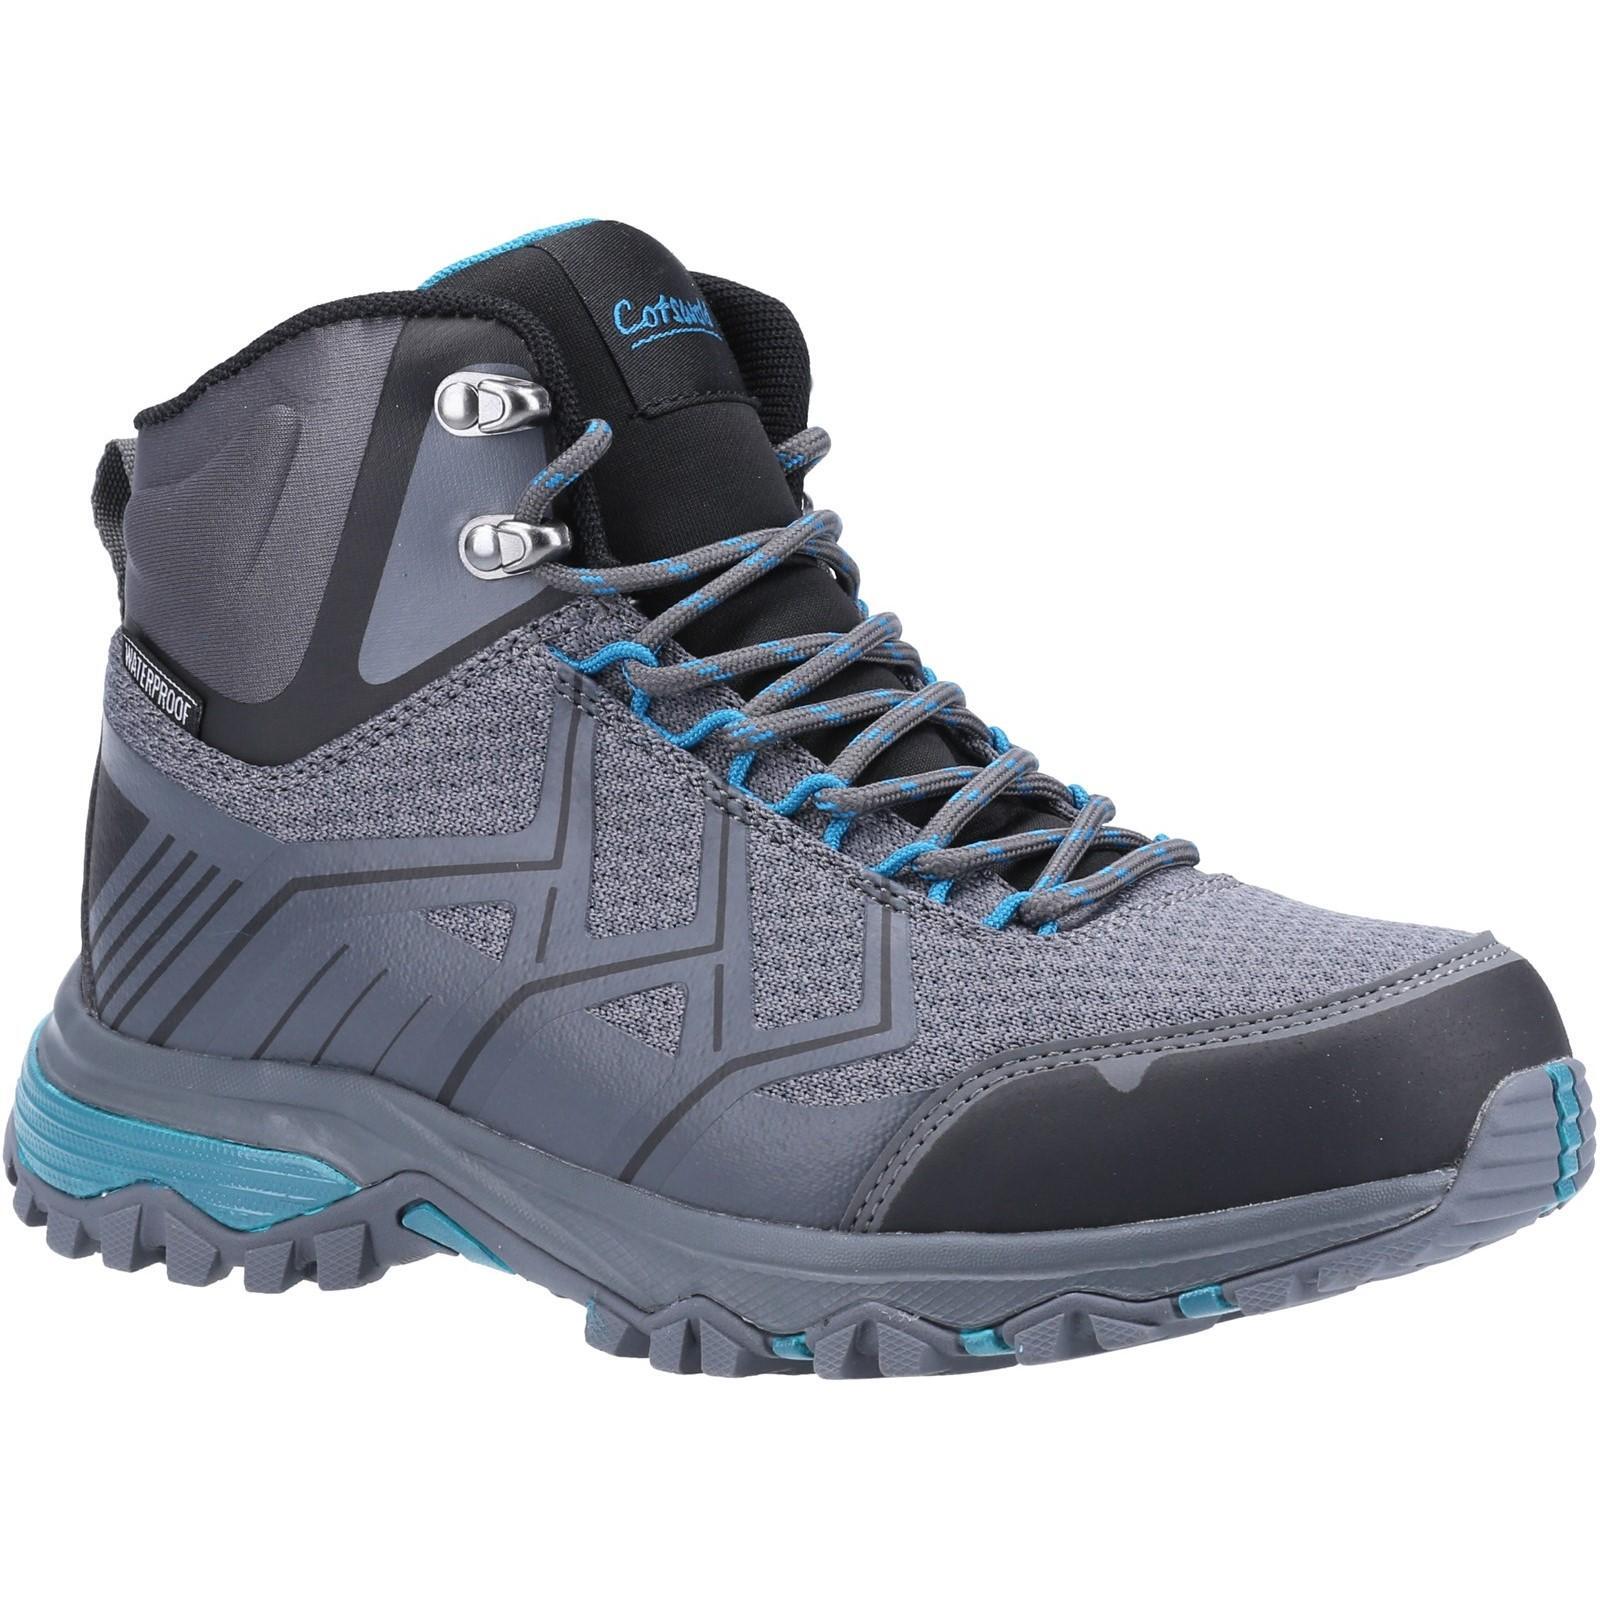 COTSWOLD Womens/Ladies Wychwood Hiking Boots (Grey/Blue)